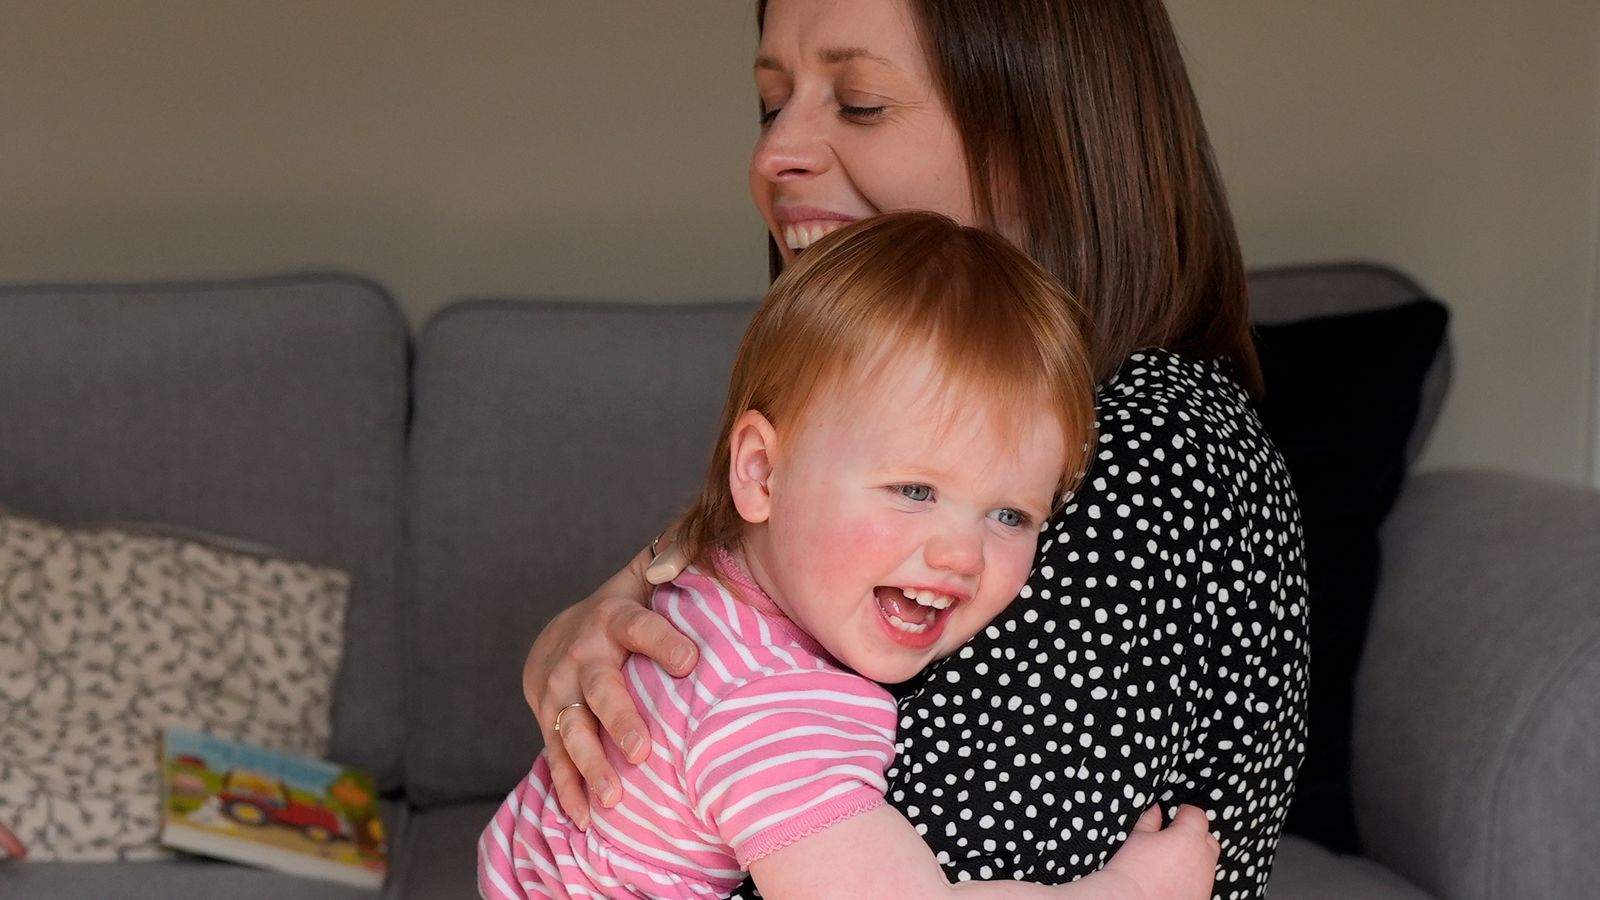 'gobsmacked': british girl's hearing restored in pioneering gene therapy trial